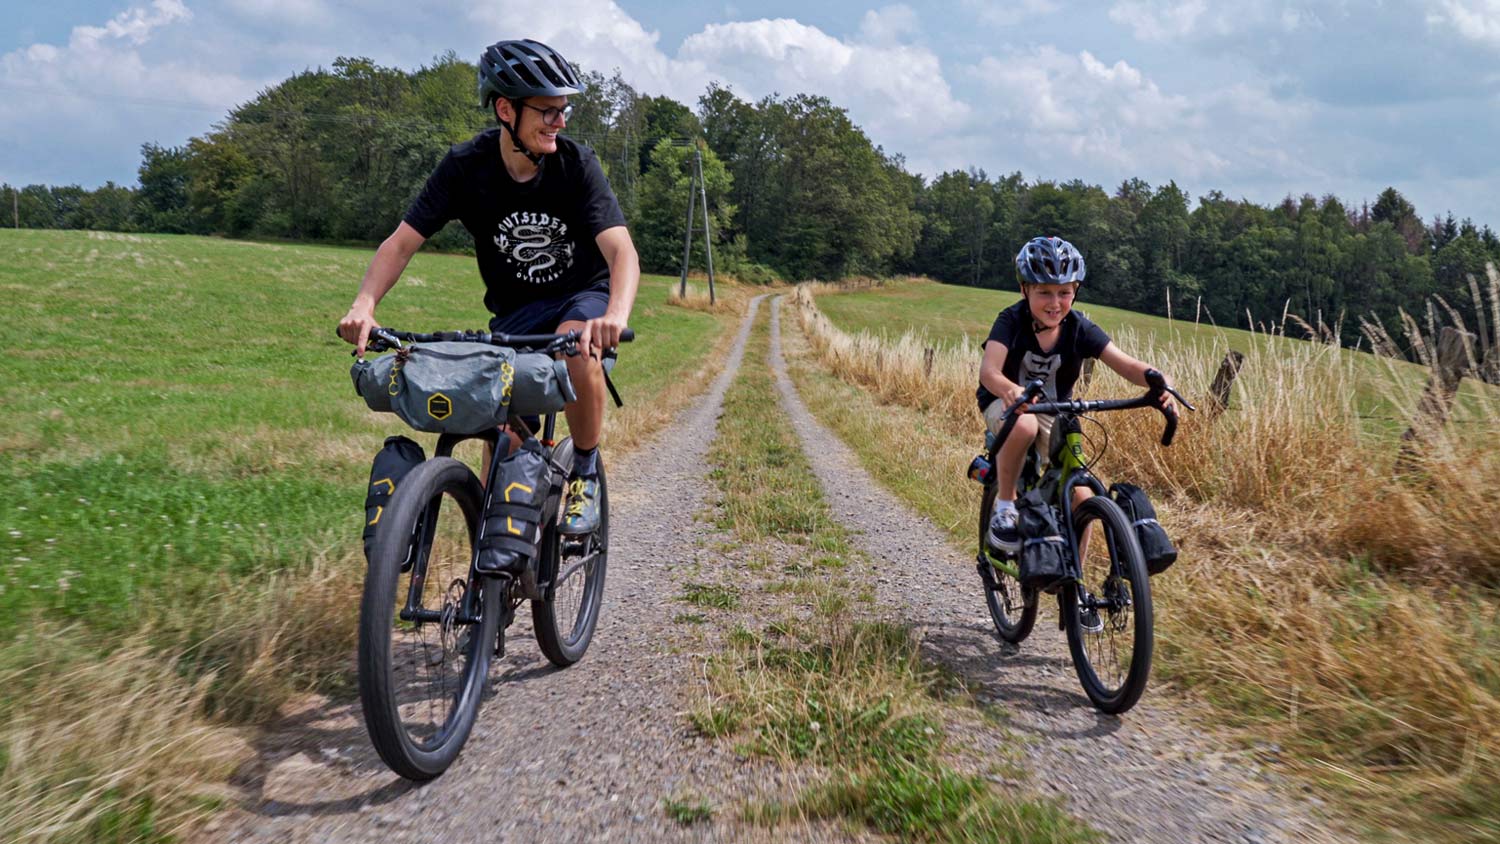 Family bikepacking with Clem and Lubin in The Analog Kids, Bombtrack photos by Marvin Beranek